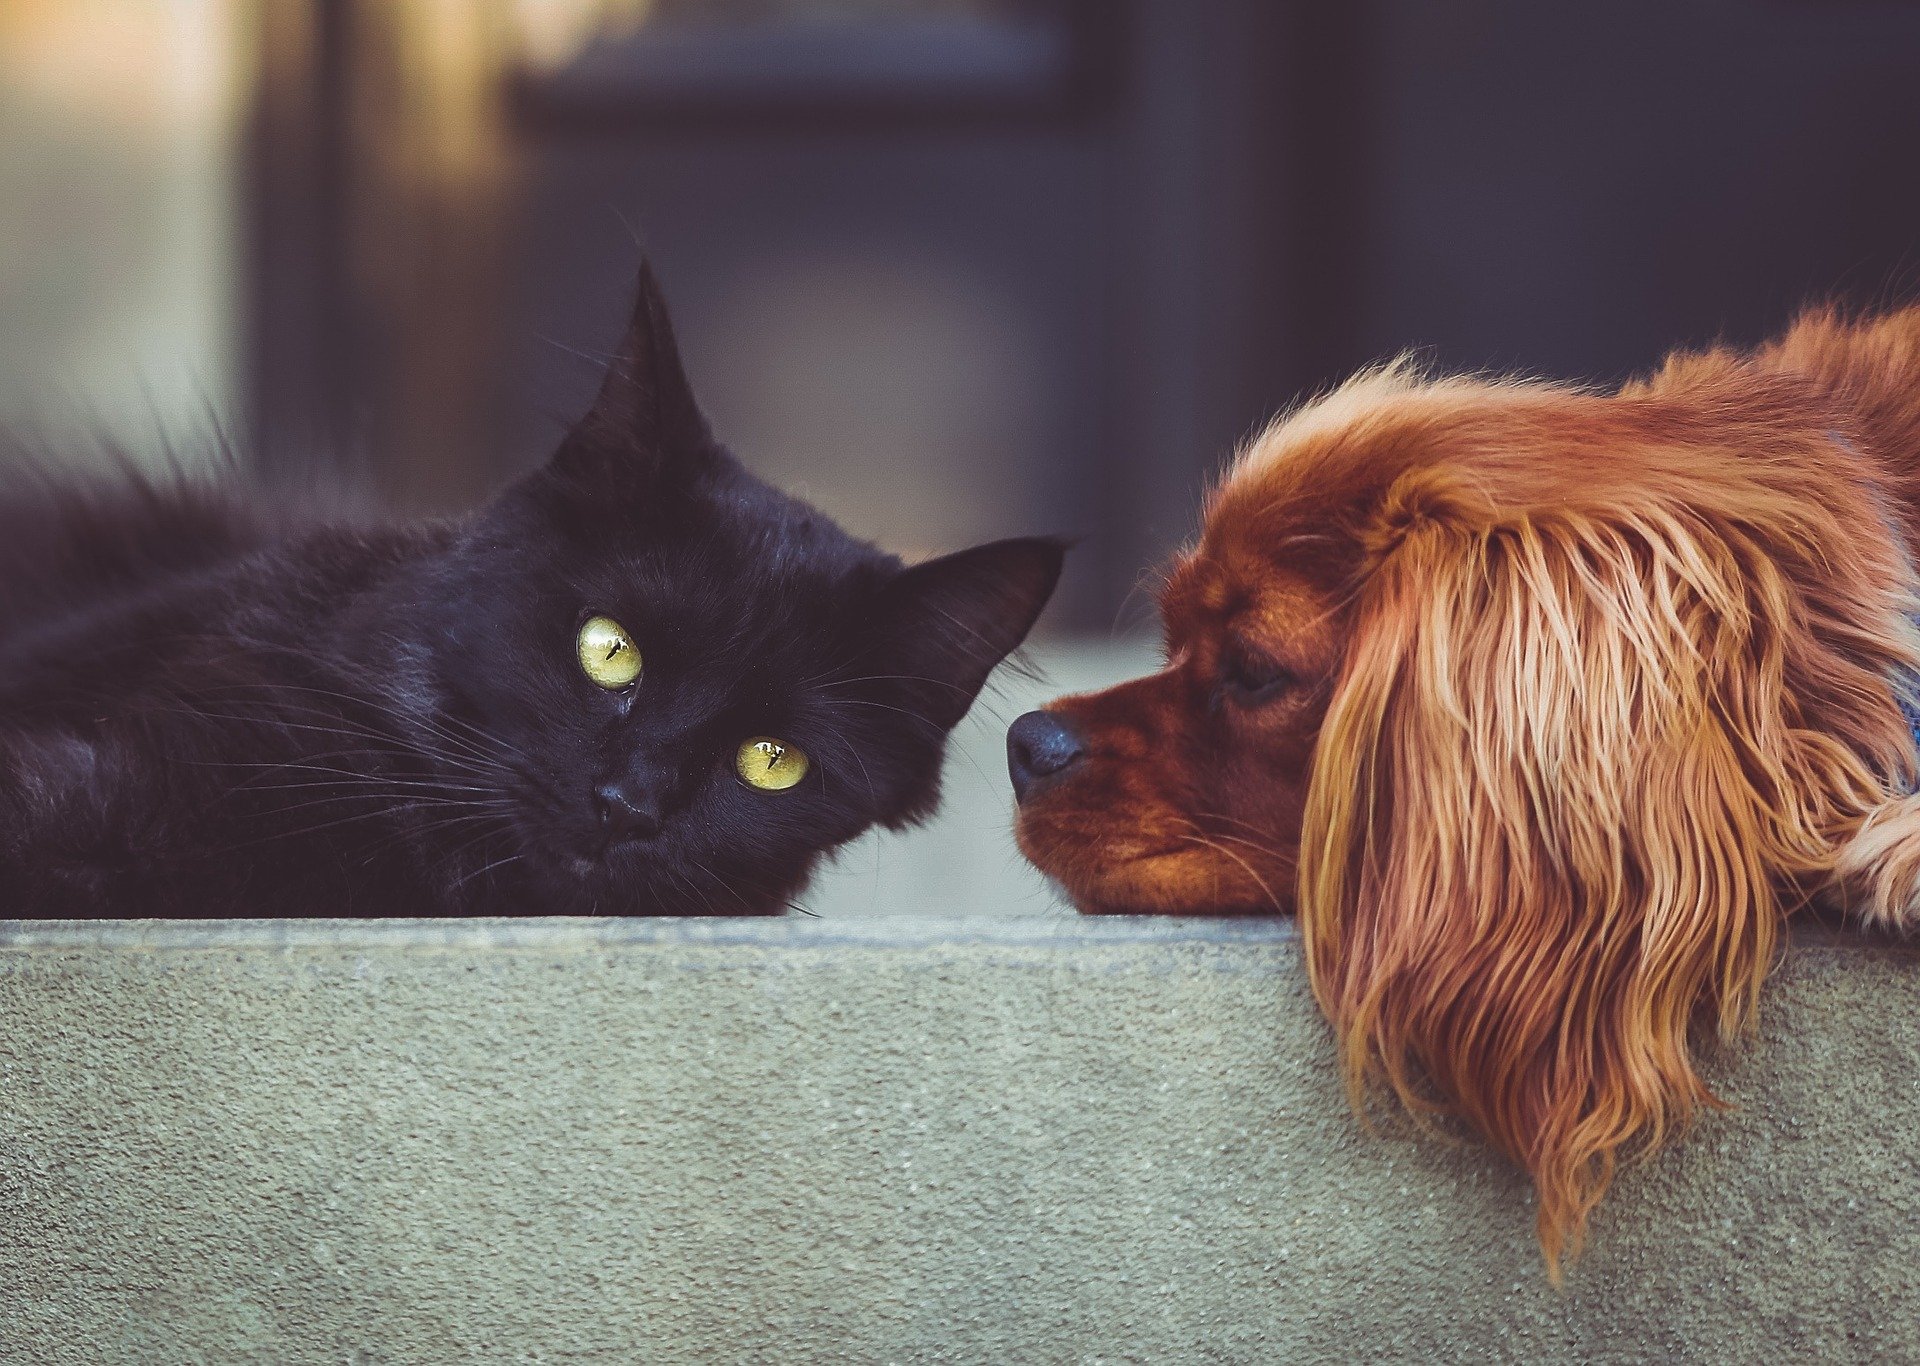 Which are smarter: cats or dogs?